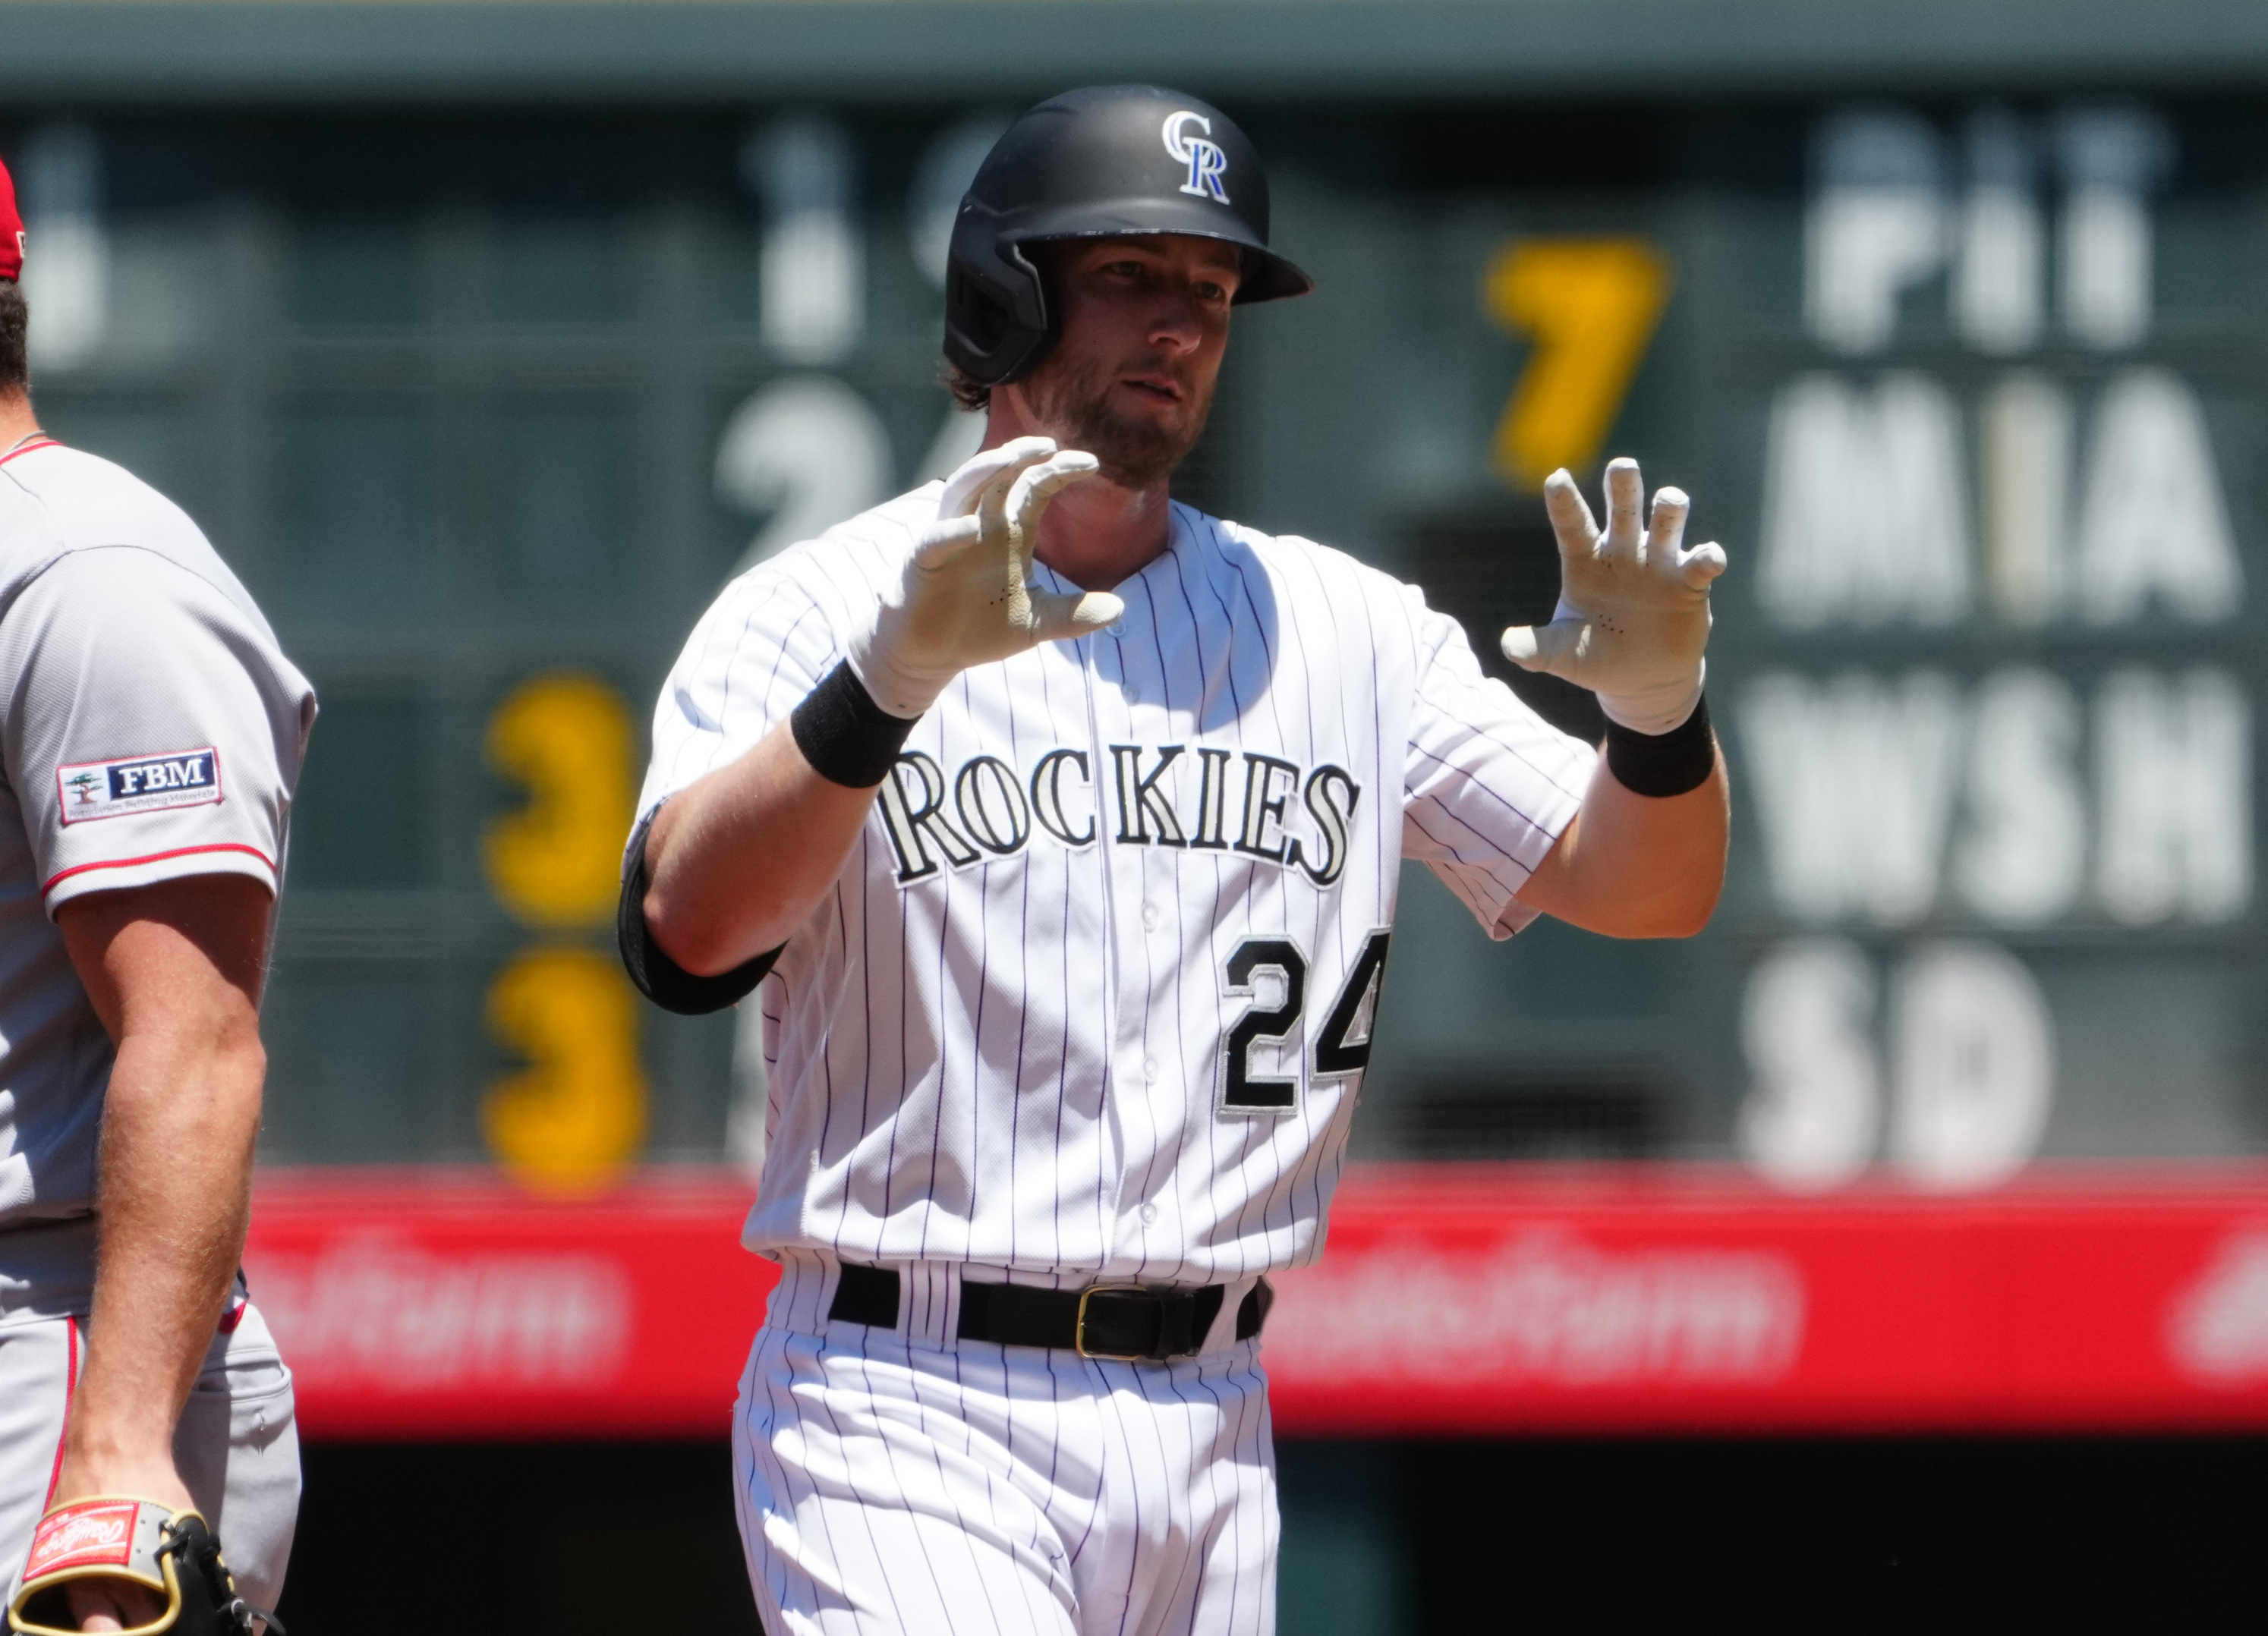 Rockies defeat Angels one day after 25-1 thumping